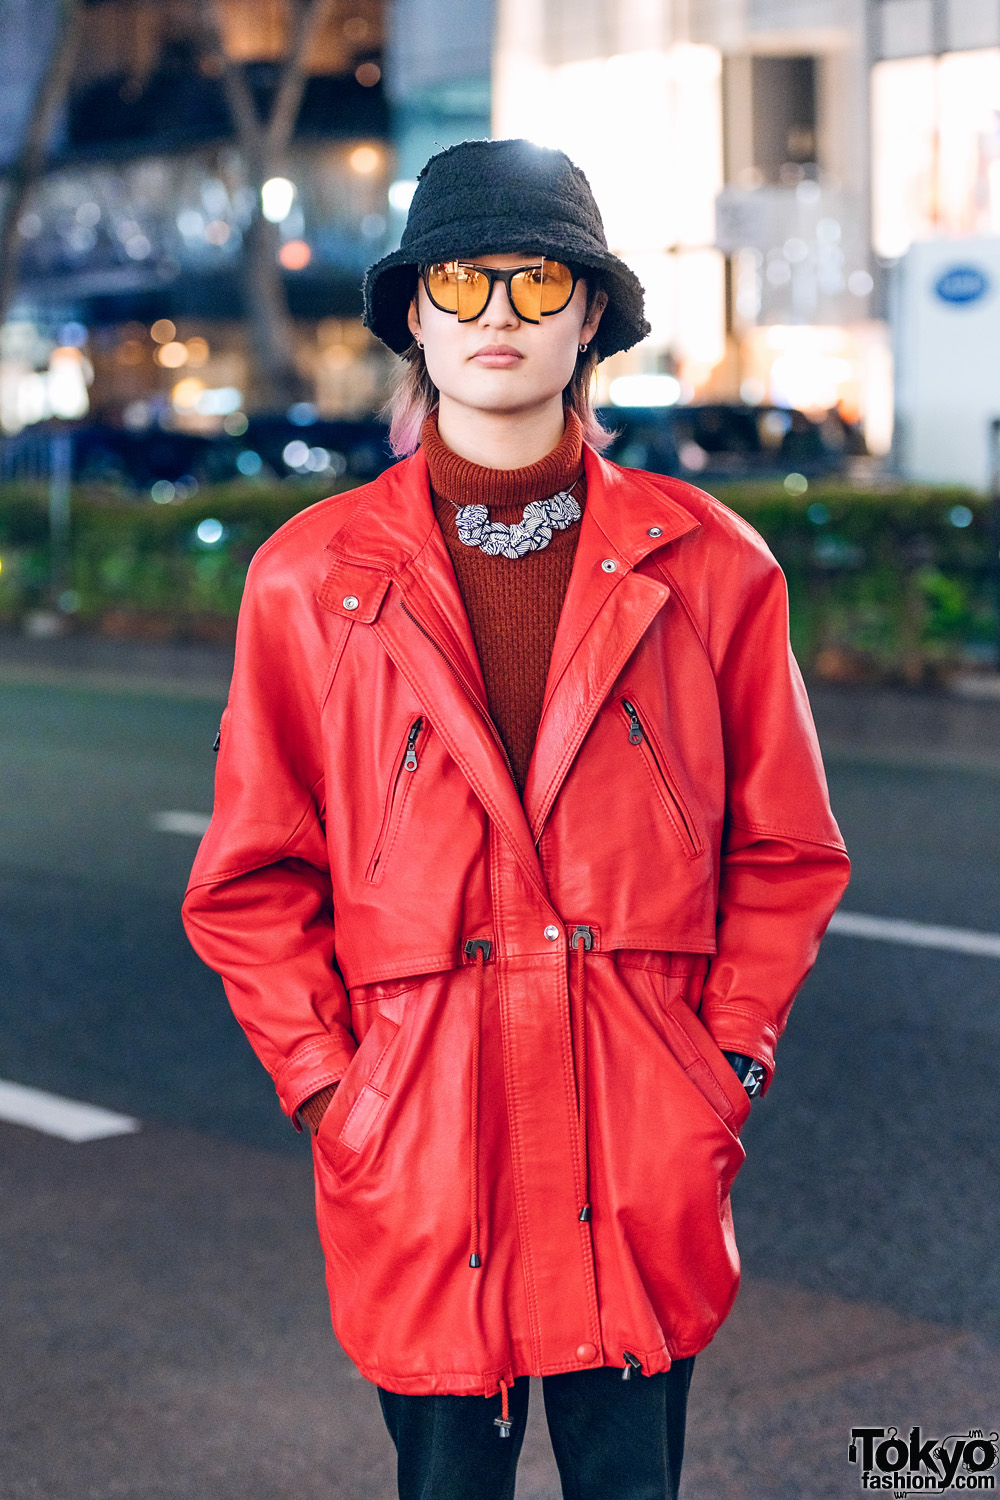 Harajuku Guy in Winter Street Style w/ Ralph Lauren, Hare, Vintage Two-Tone  Sneakers & Fur Trapper Hat – Tokyo Fashion